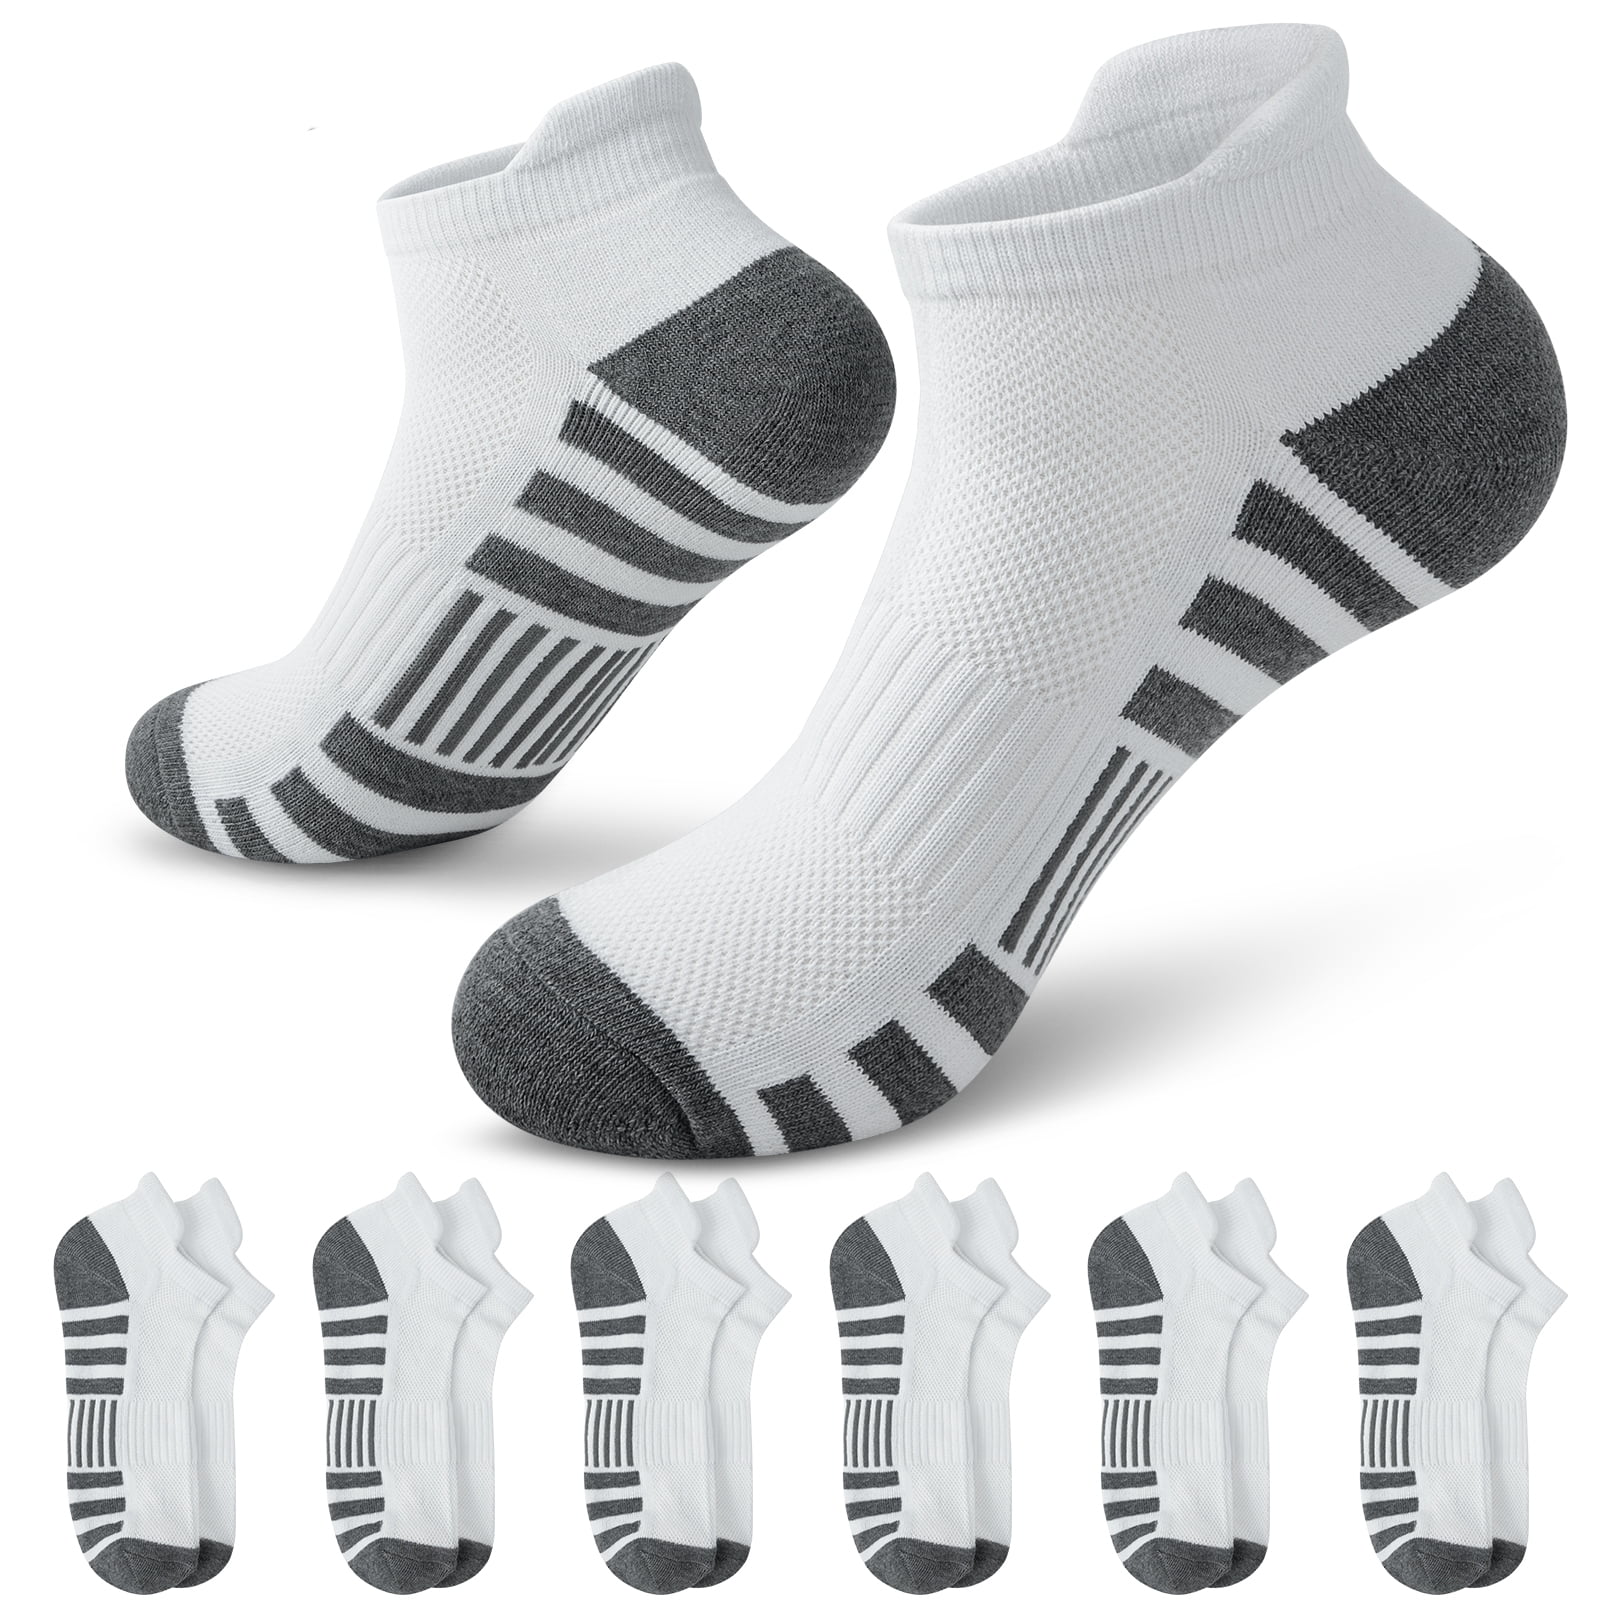 Loritta 12 Pairs Mens Ankle Athletic Low Cut Sports Socks Cushioned  Breathable Running Cotton Socks Size 10-13 